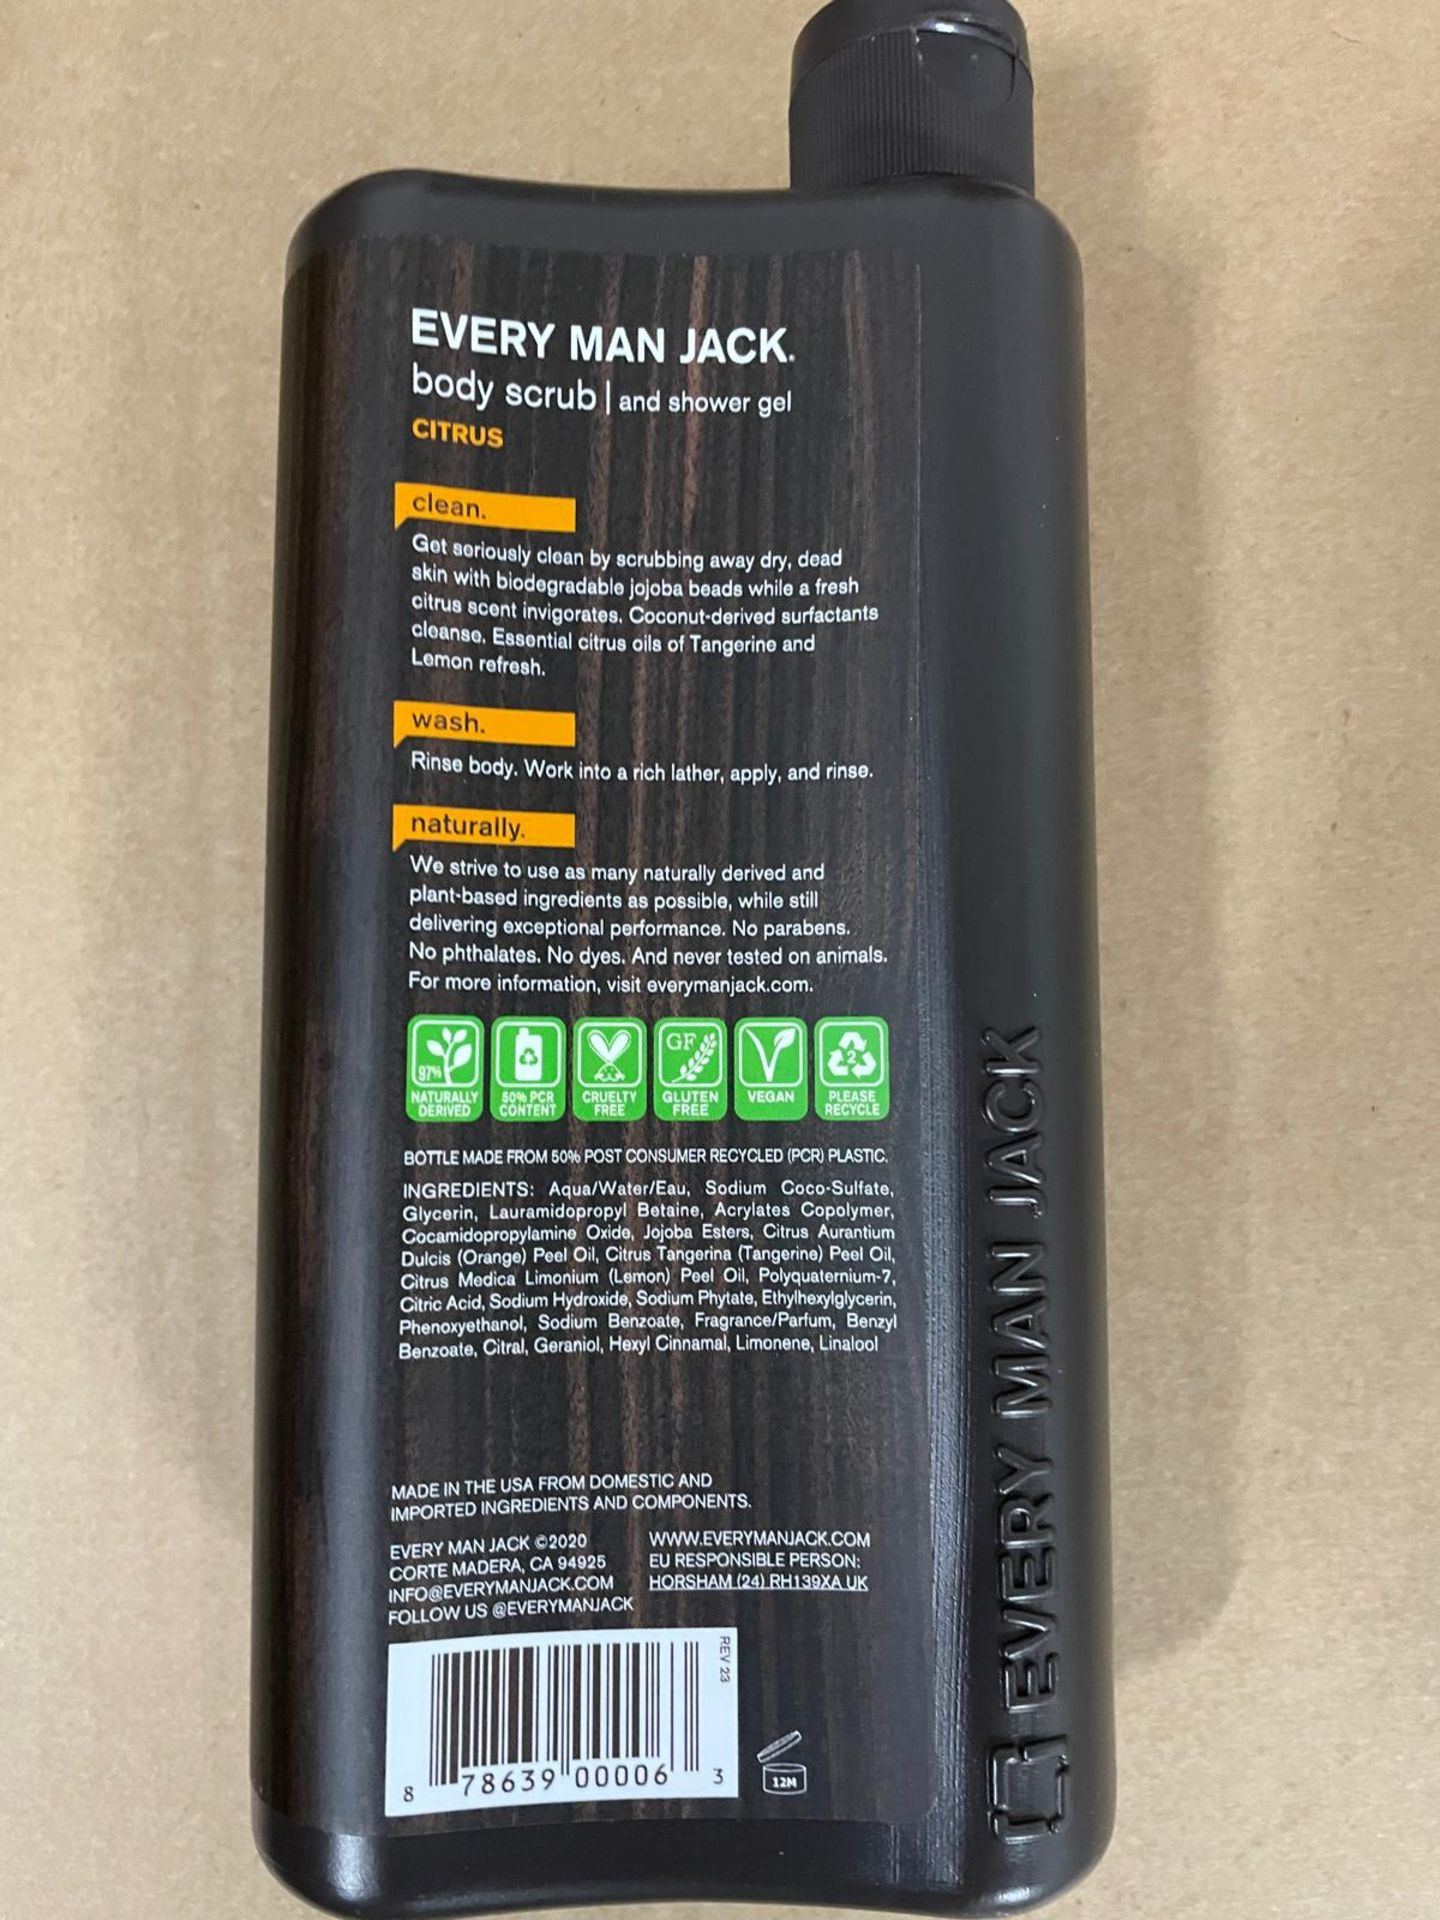 Every Man Jack Citrus Body Scrub and Shower Gel x48, Est Retail Value £720 - Image 2 of 2